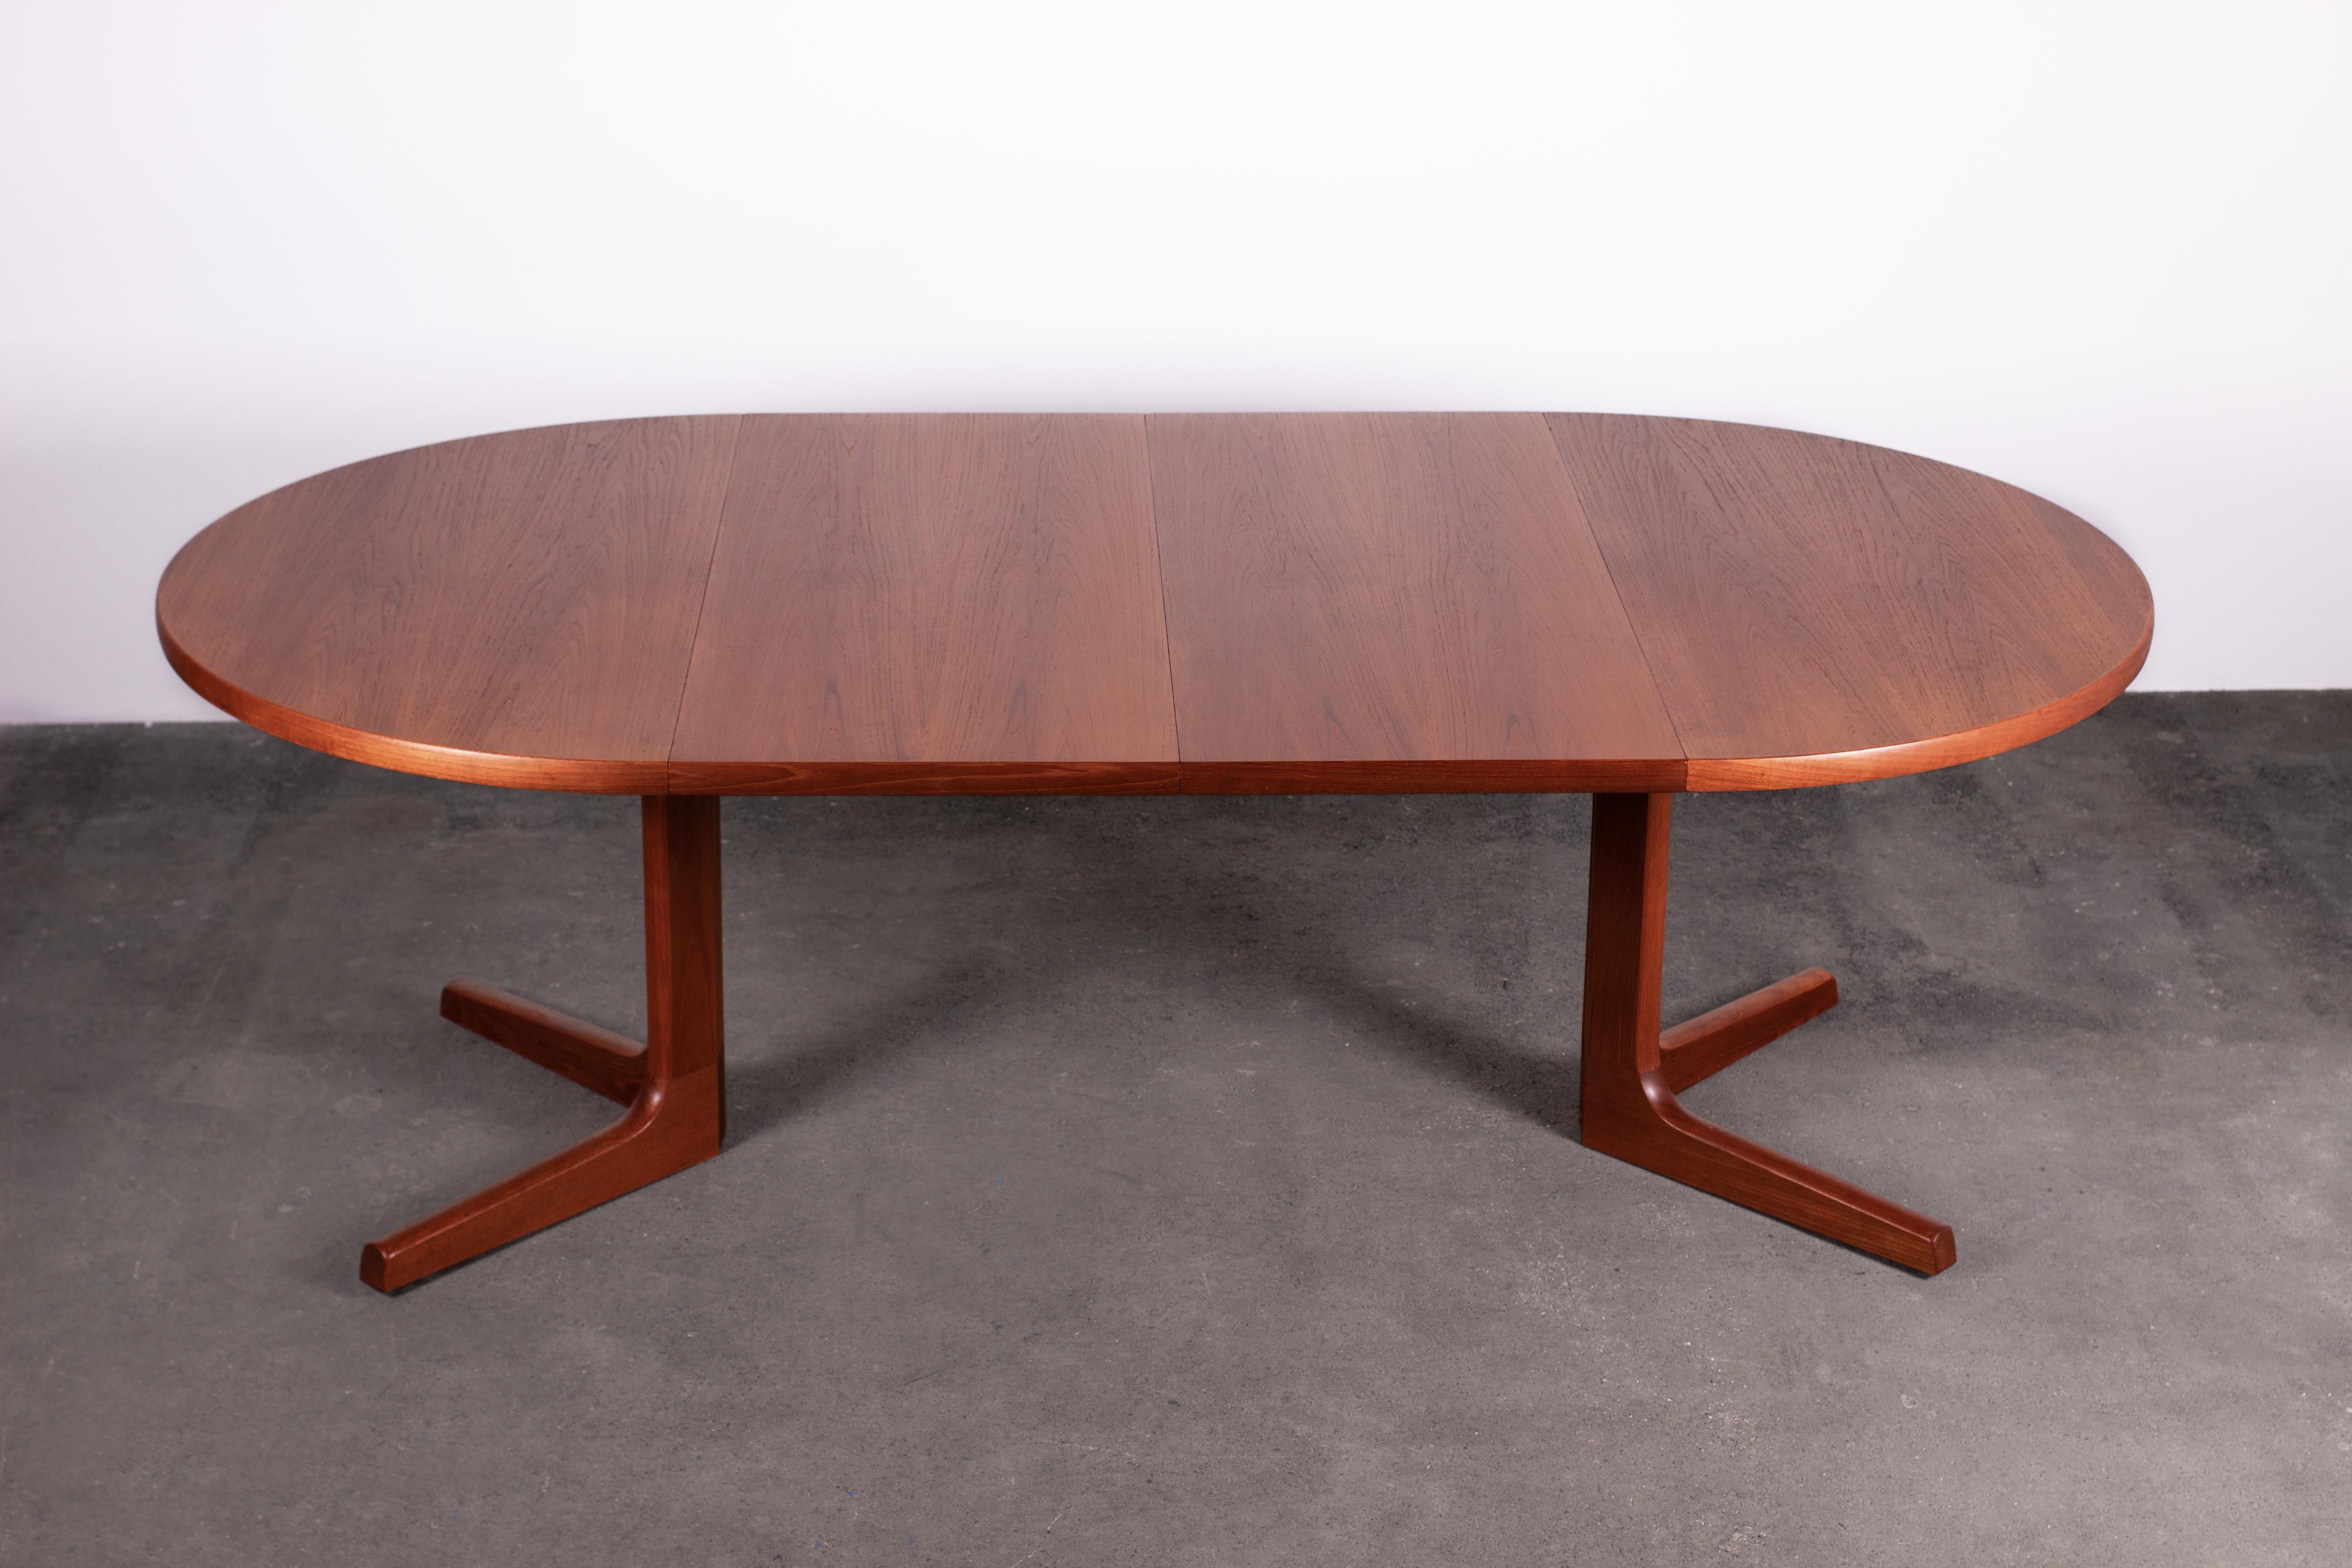 Very elegant 1960s round teak 3-size extension dining table by Ansanger Mobler (AM Denmark). Comfortably seating either 4, 6 or 8 large dining chairs. Quintessential Scandinavian Modern design: minimal, fine materials, highly practical, clean smooth